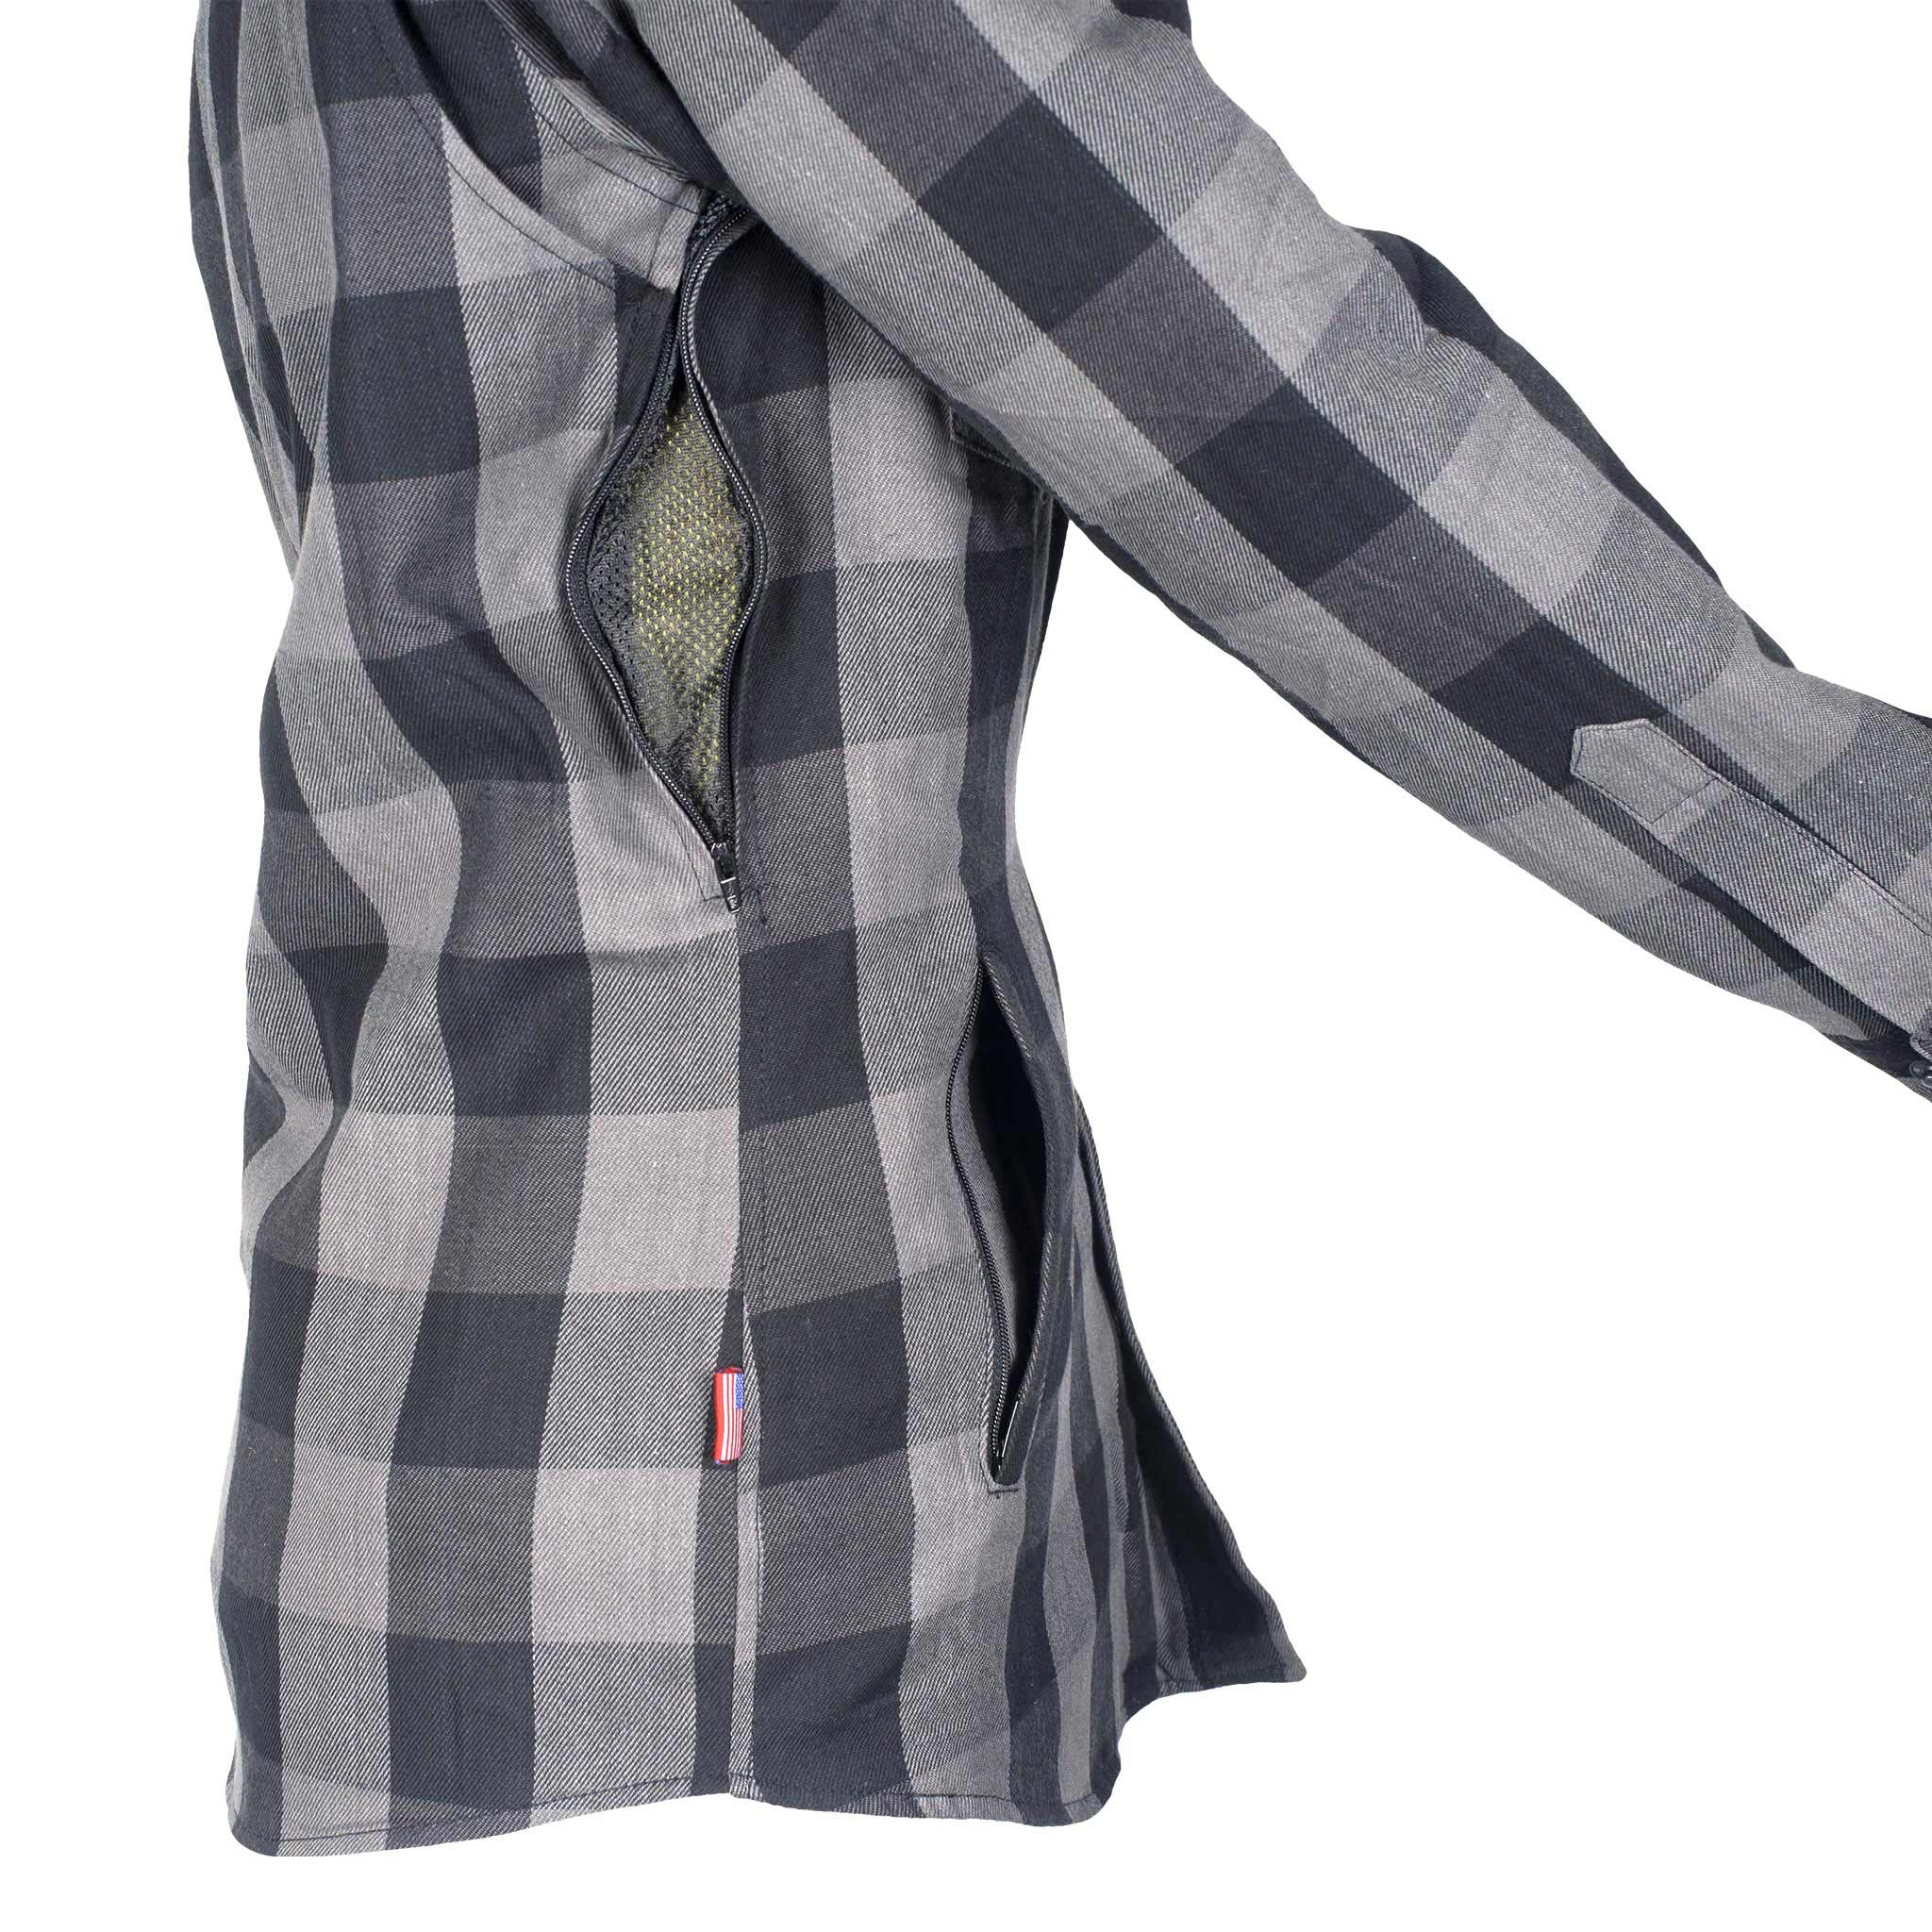 Protective Flannel Shirt for Women - Grey Checkered with Pads